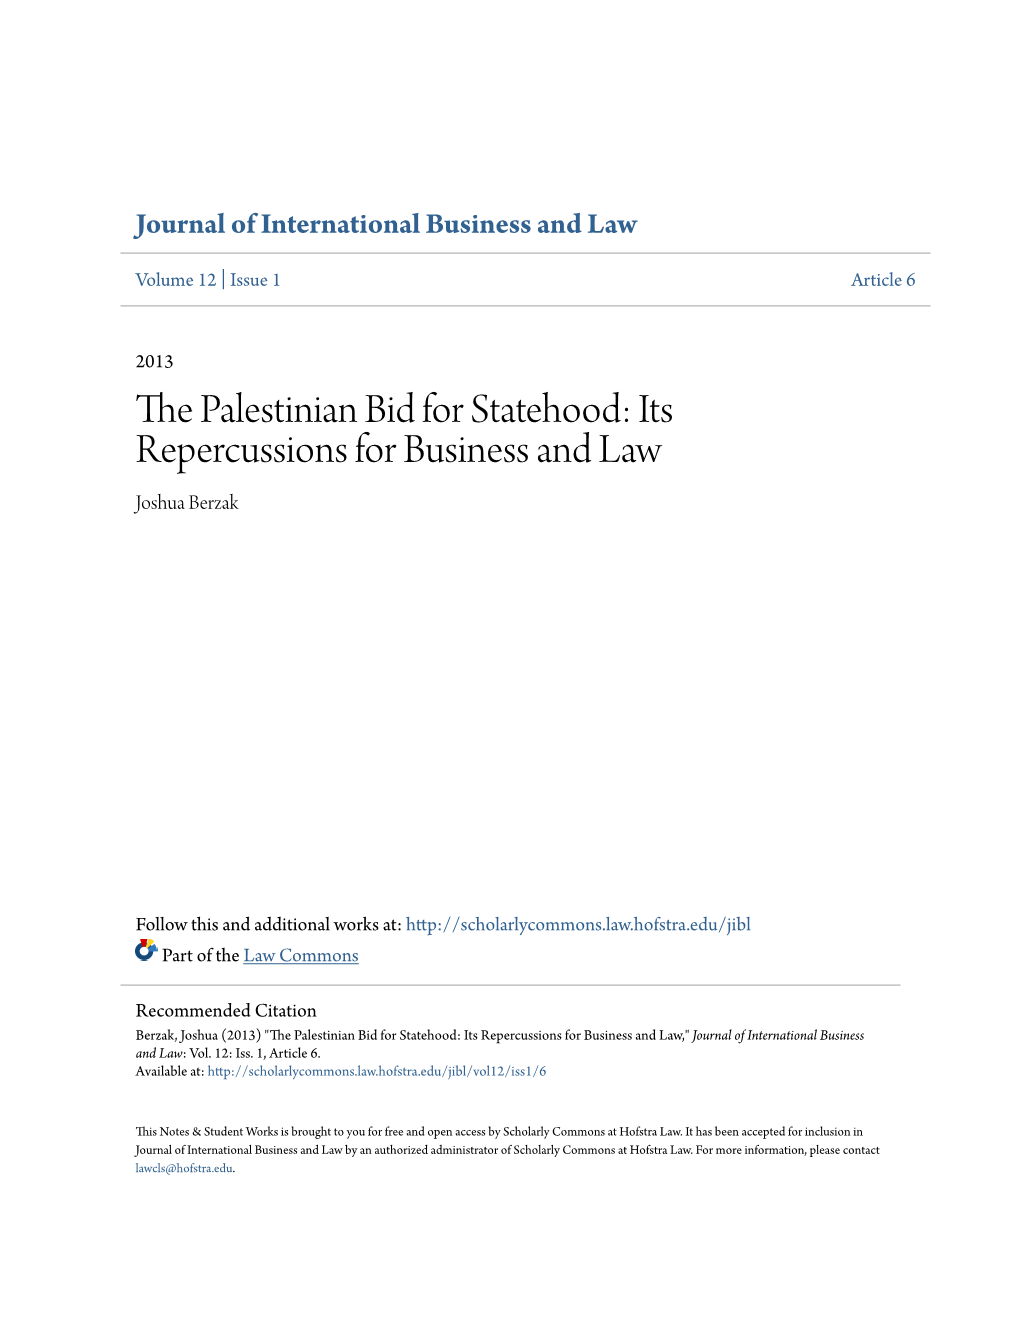 The Palestinian Bid for Statehood: Its Repercussions for Business And